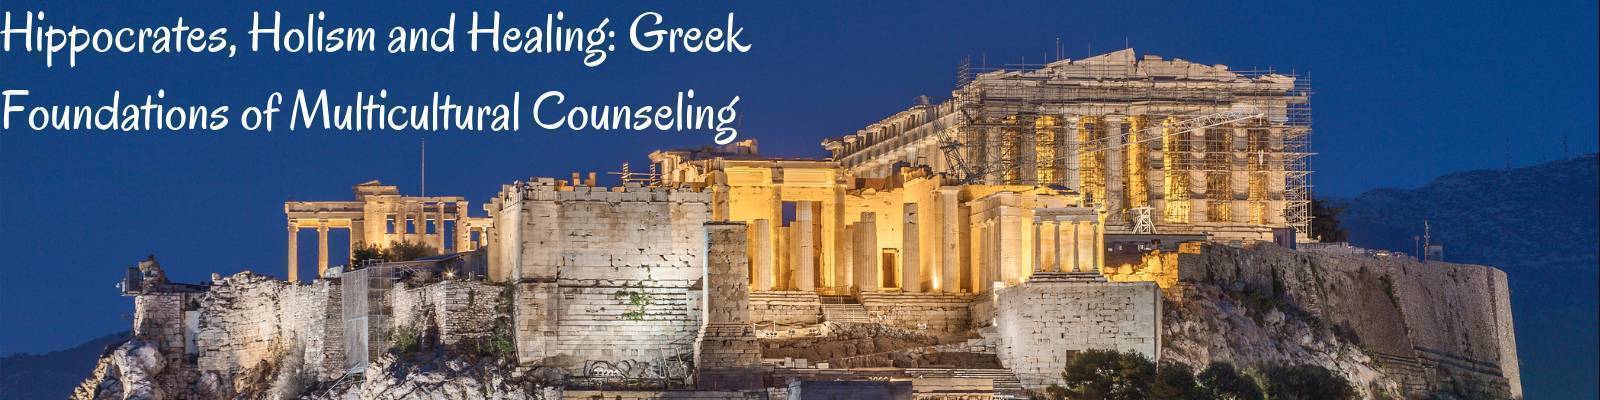 Hippocrates, Holism and Healing: Greek Foundations of Multicultural Counseling